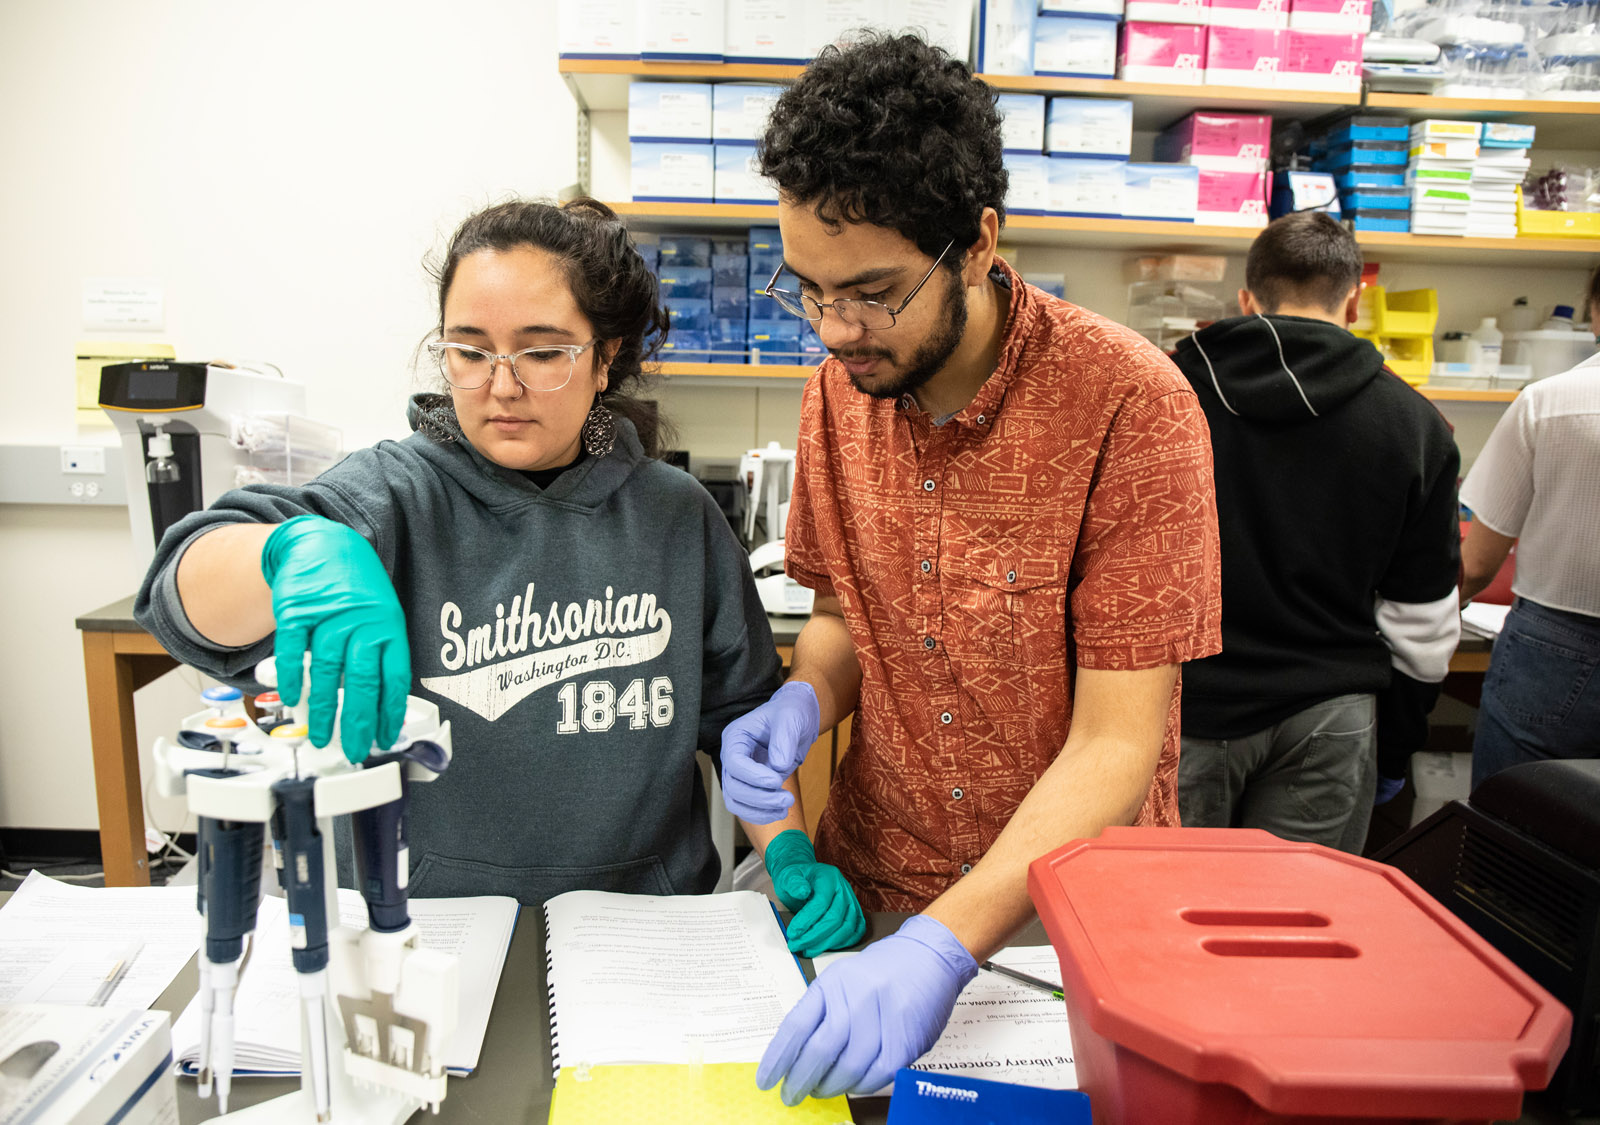 Sara Hanson’s MB350 Laboratory in Genomics course visited the University of Colorado-Boulder’s BioFrontiers Sequencing Core Facility to complete the preparation of samples and load them into sequencing equipment. <strong>Kristie Shirley ’20</strong> and <strong>Pedro Tirado Velez ’20</strong> work on their team data before putting it through a sequencing processor.